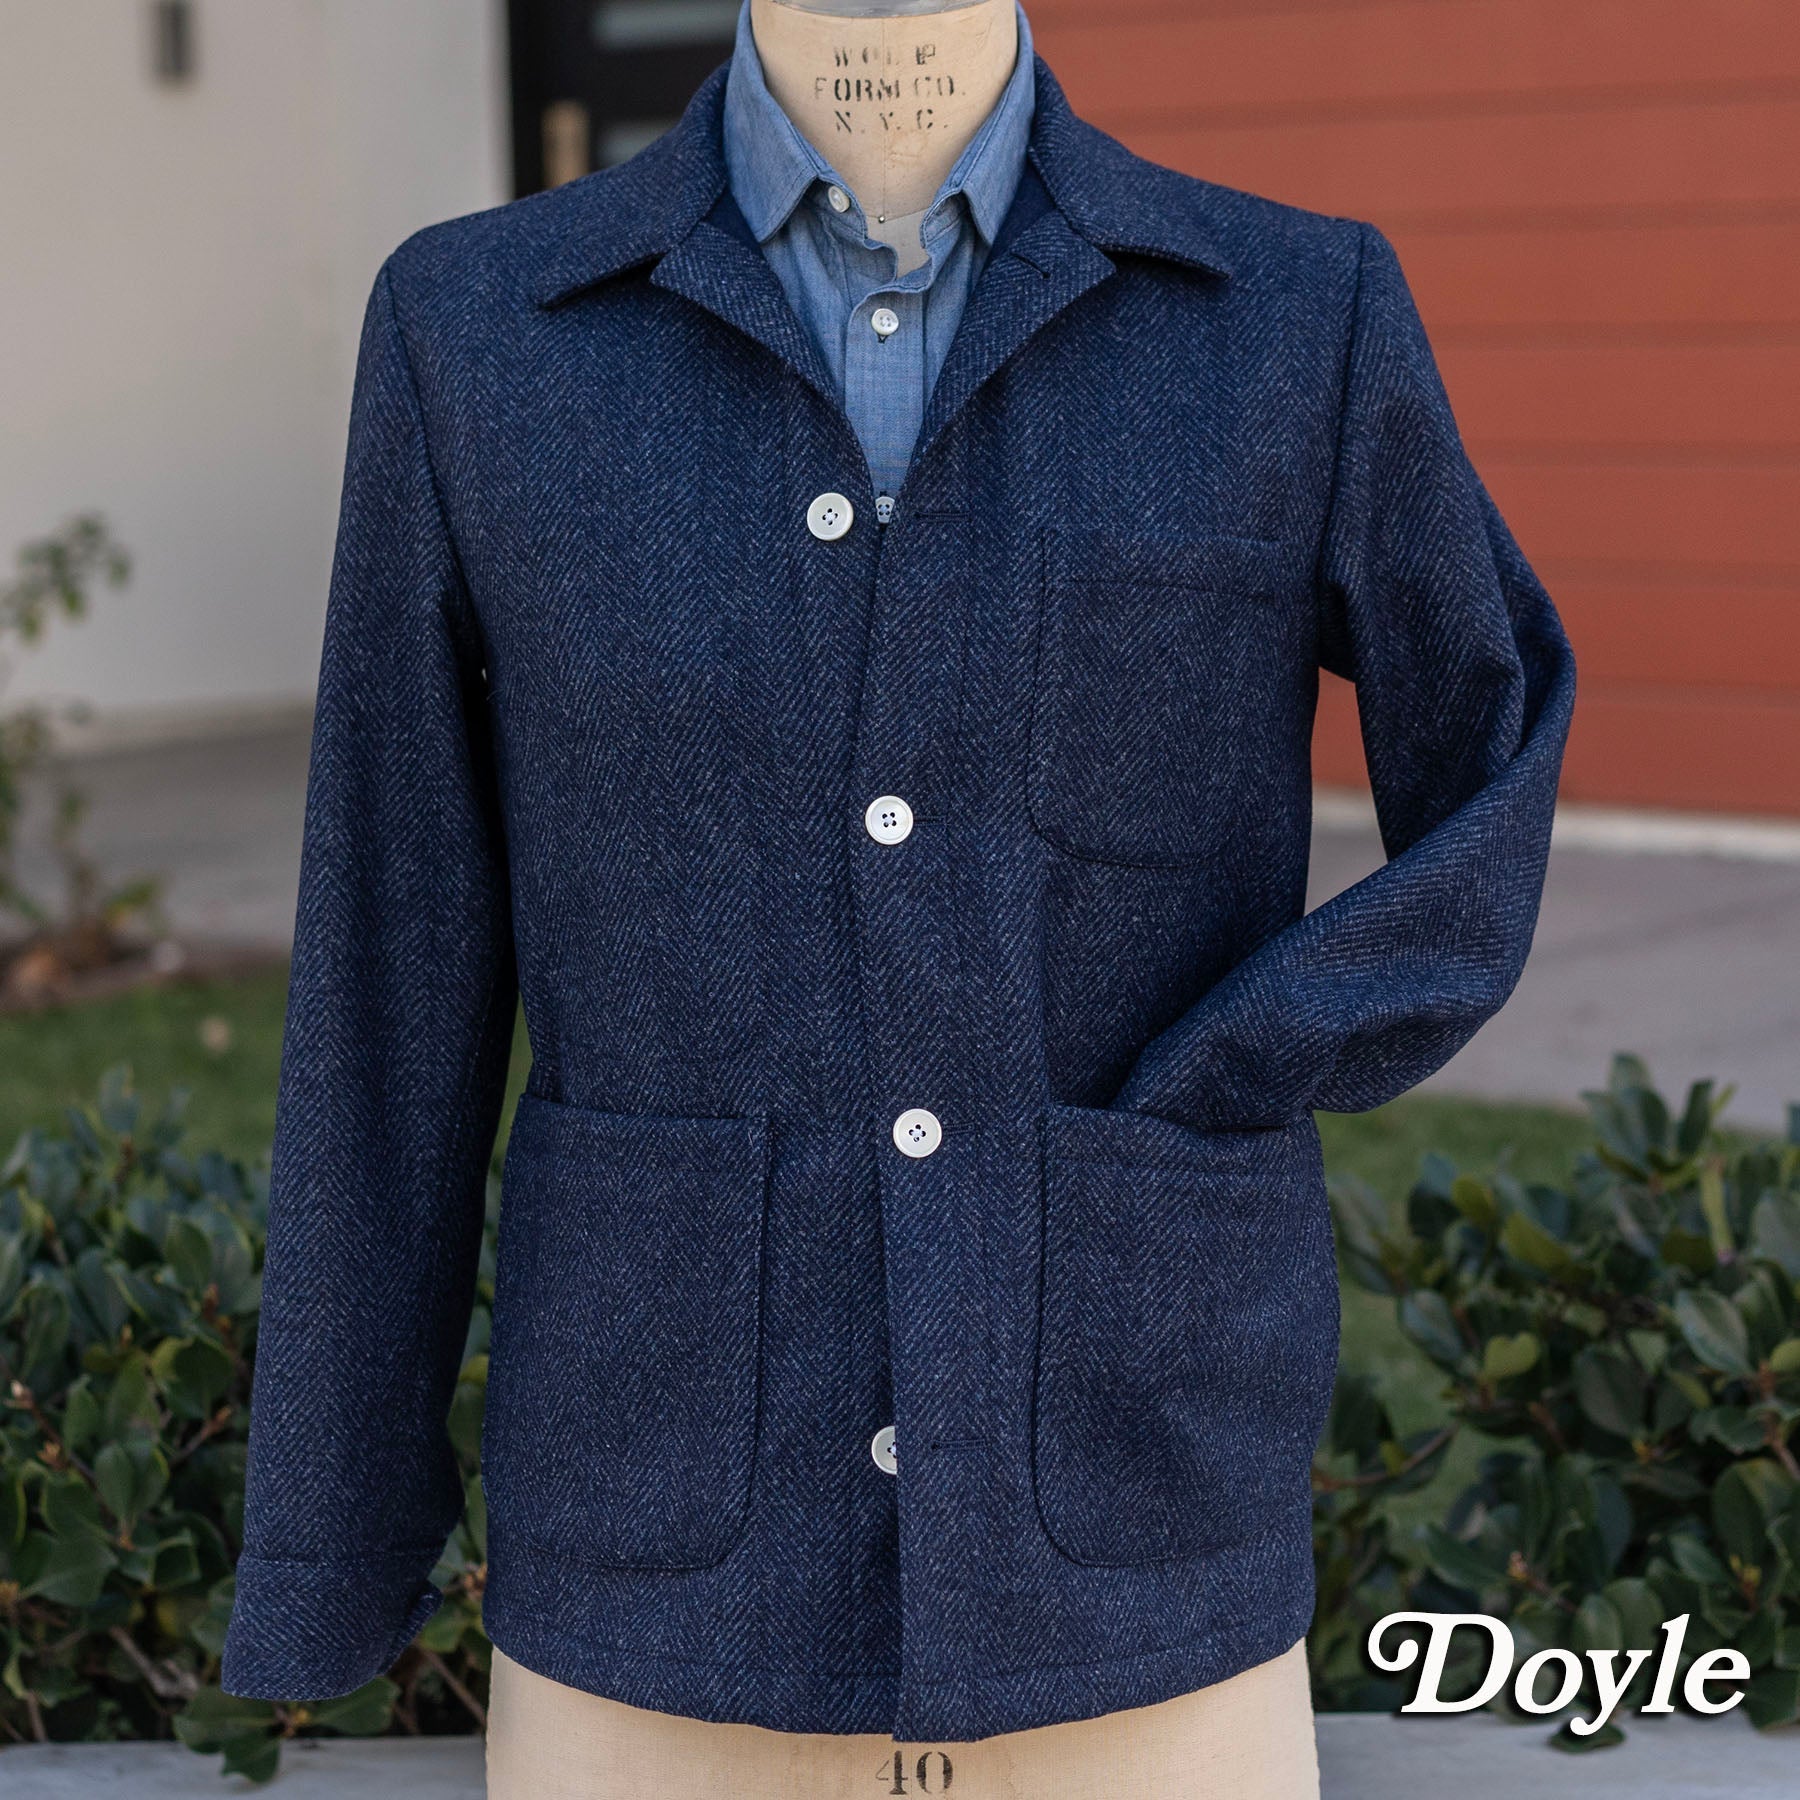 Custom Suits, Sportcoats, Doyles & Field Jackets Washable Donegal Tweed